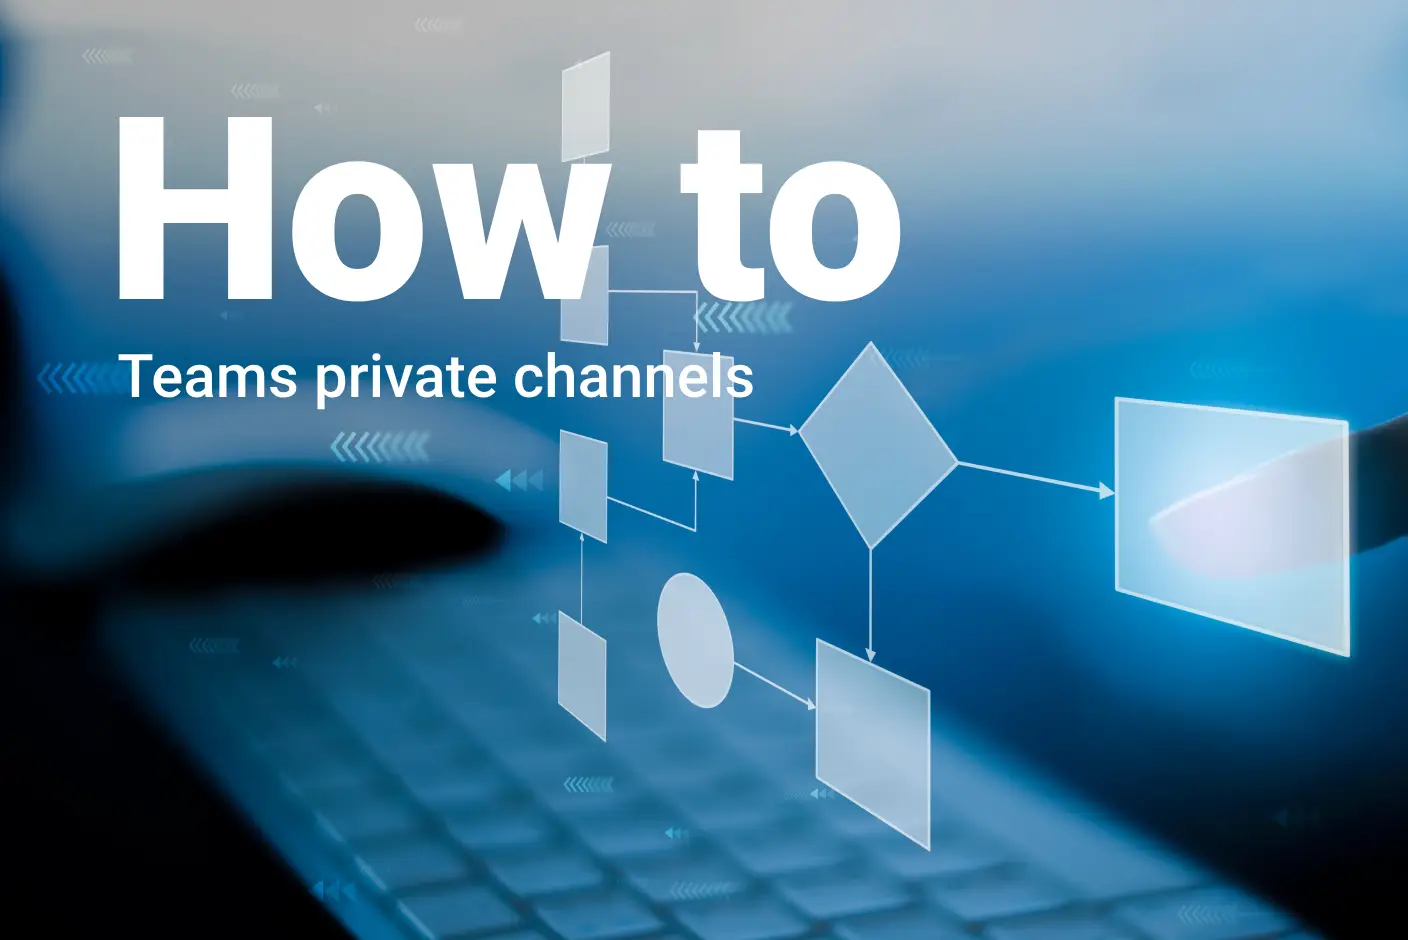 How to Teams private channels